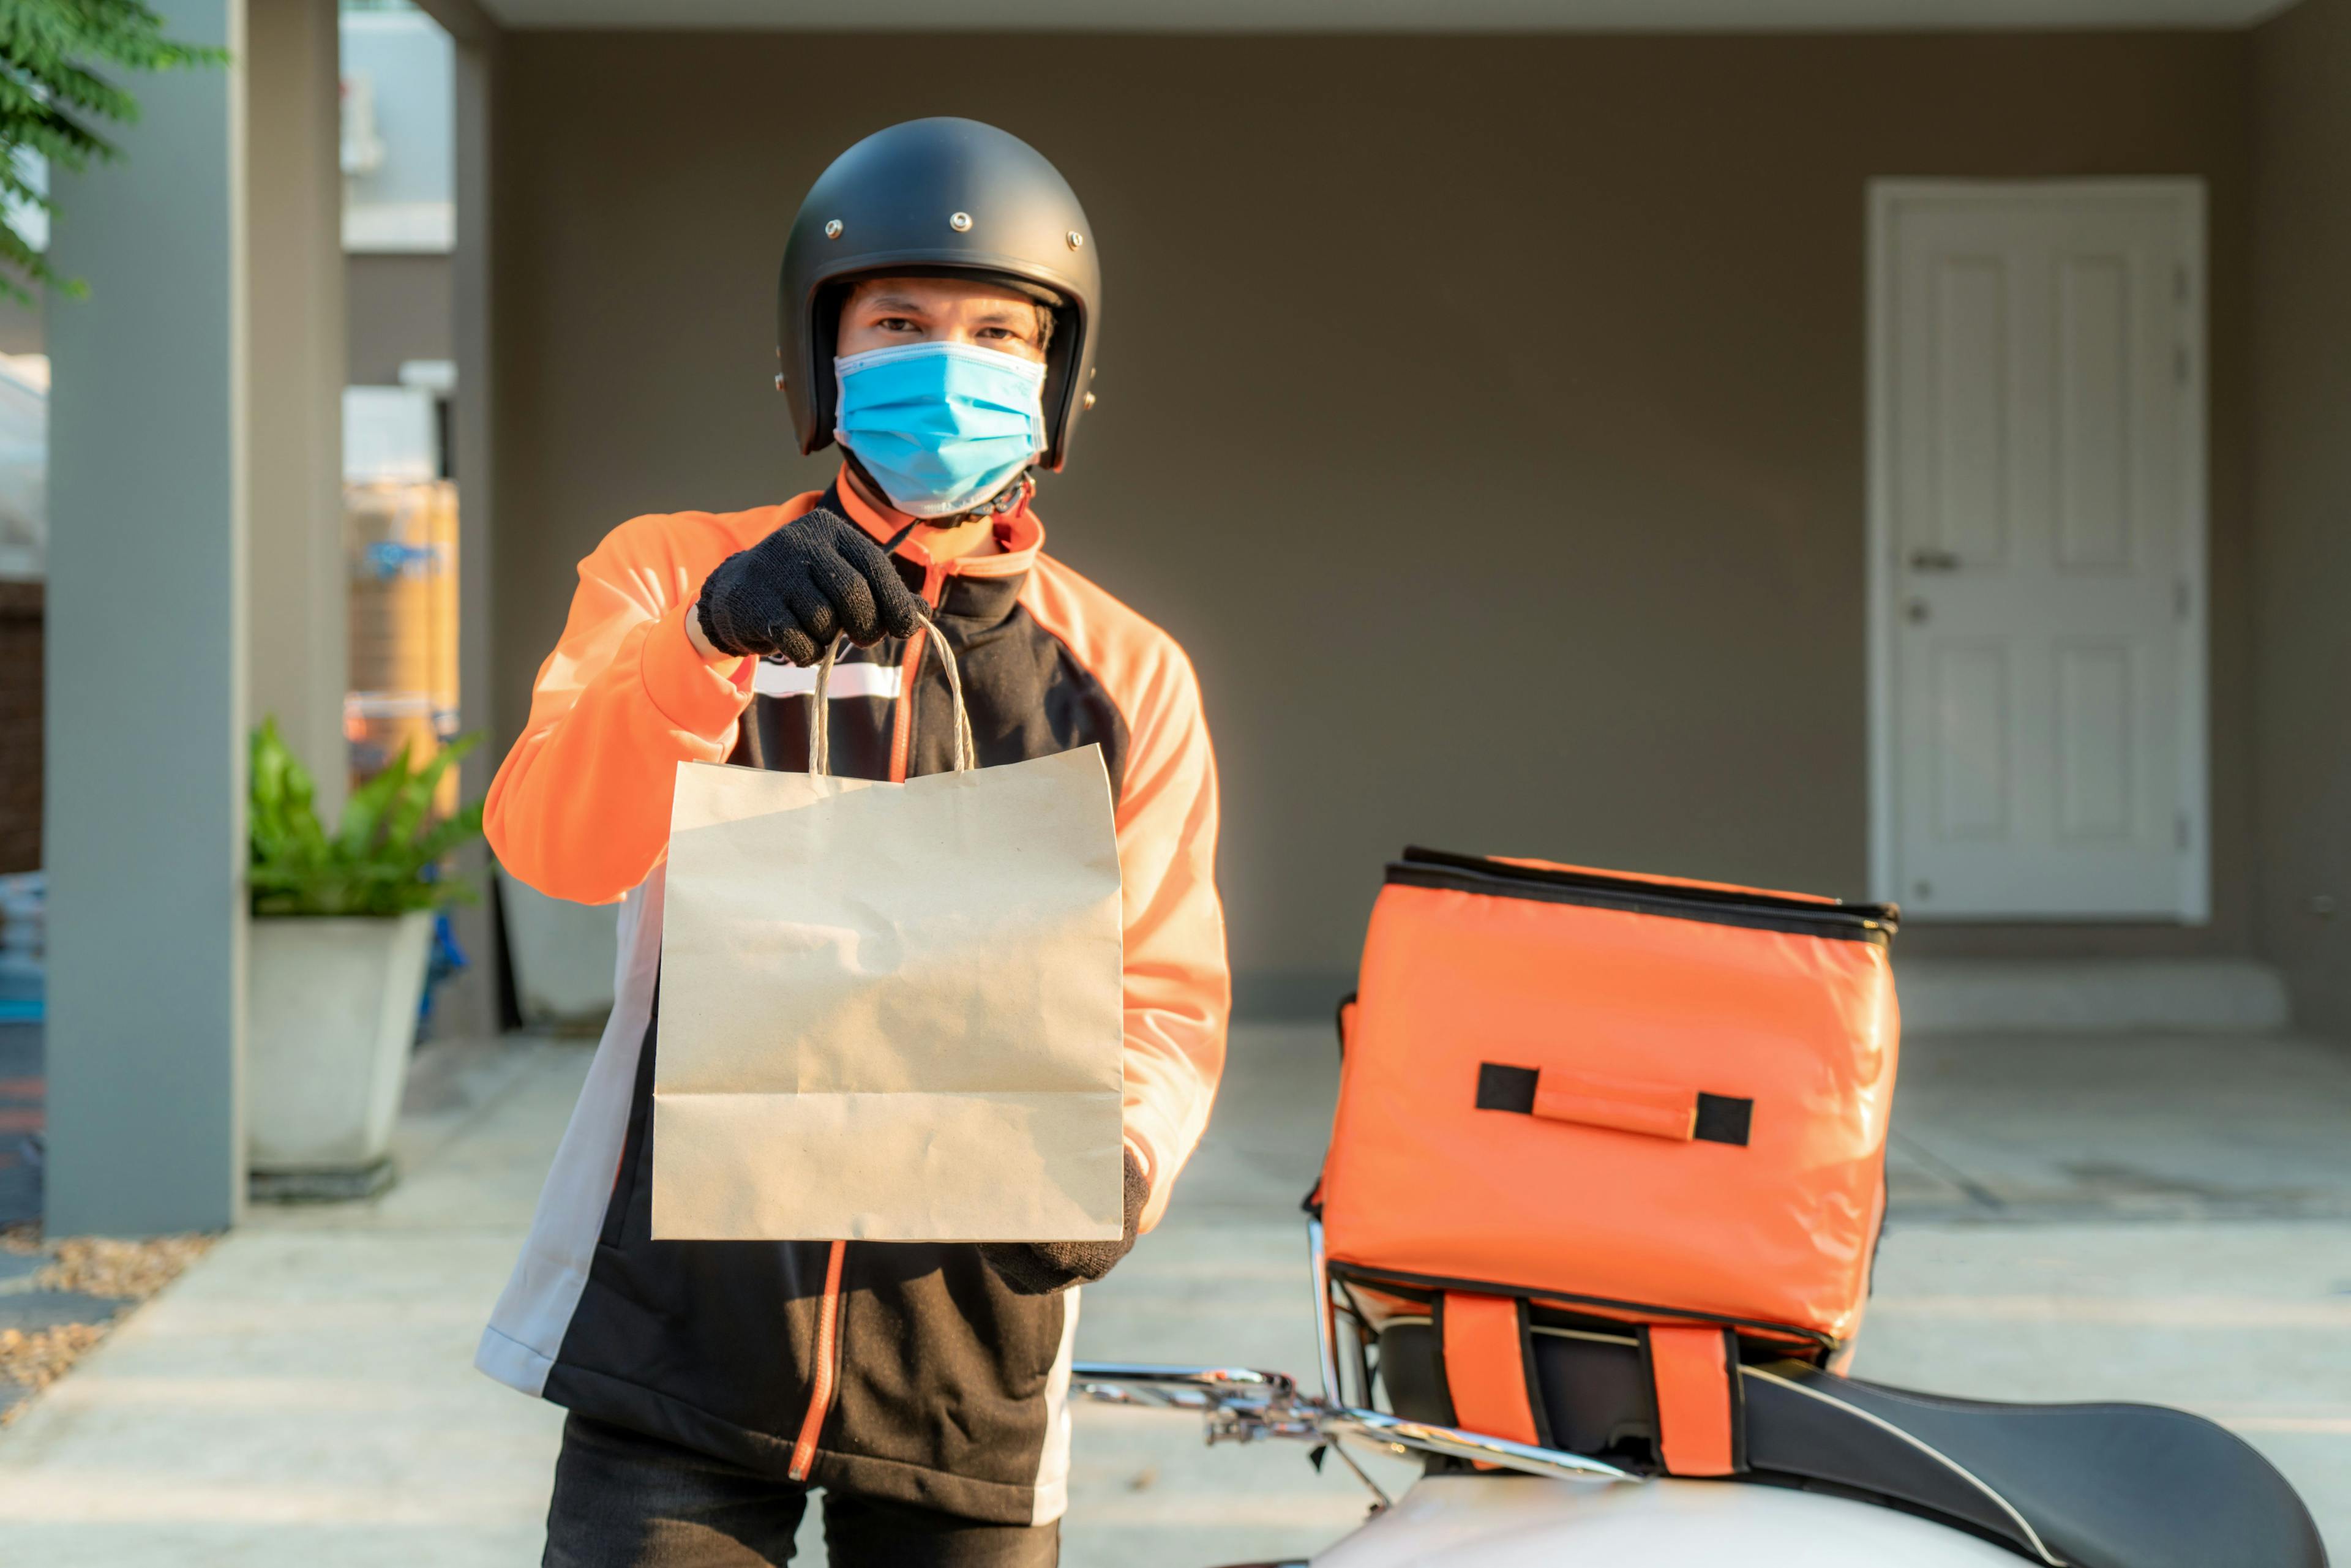 Delivery man in mask holding bag for contactless delivery platforms.